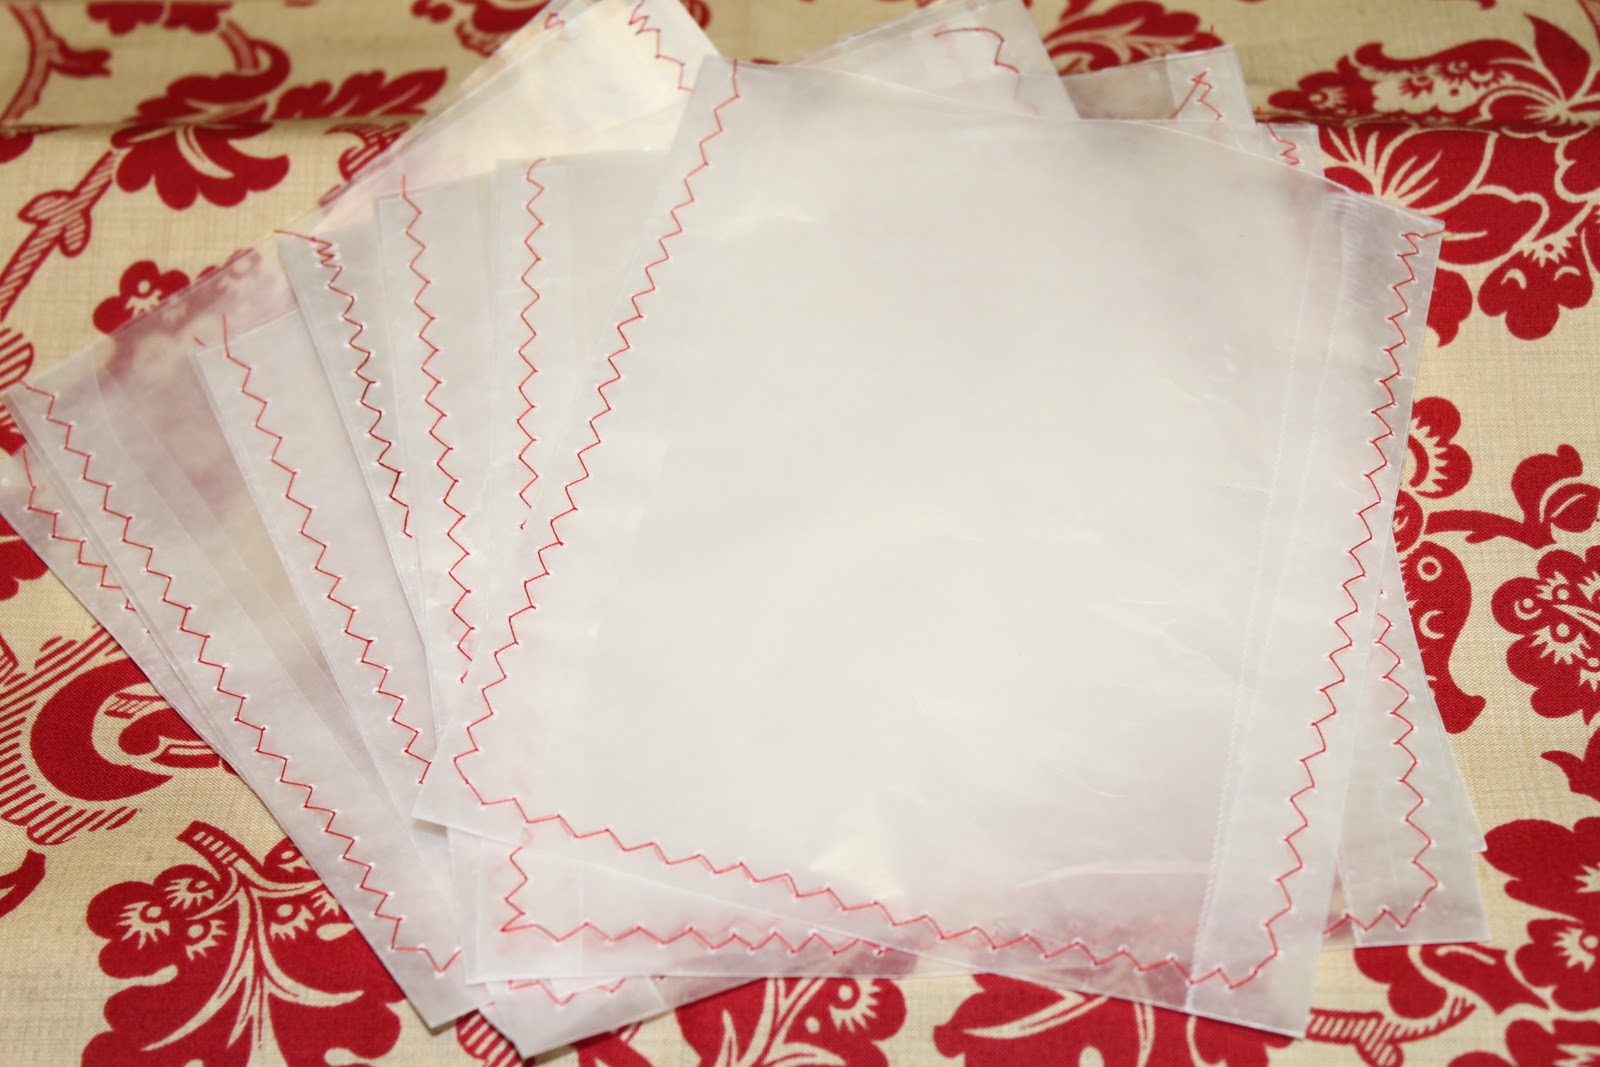 Wax Paper Bags - Giggles Galore